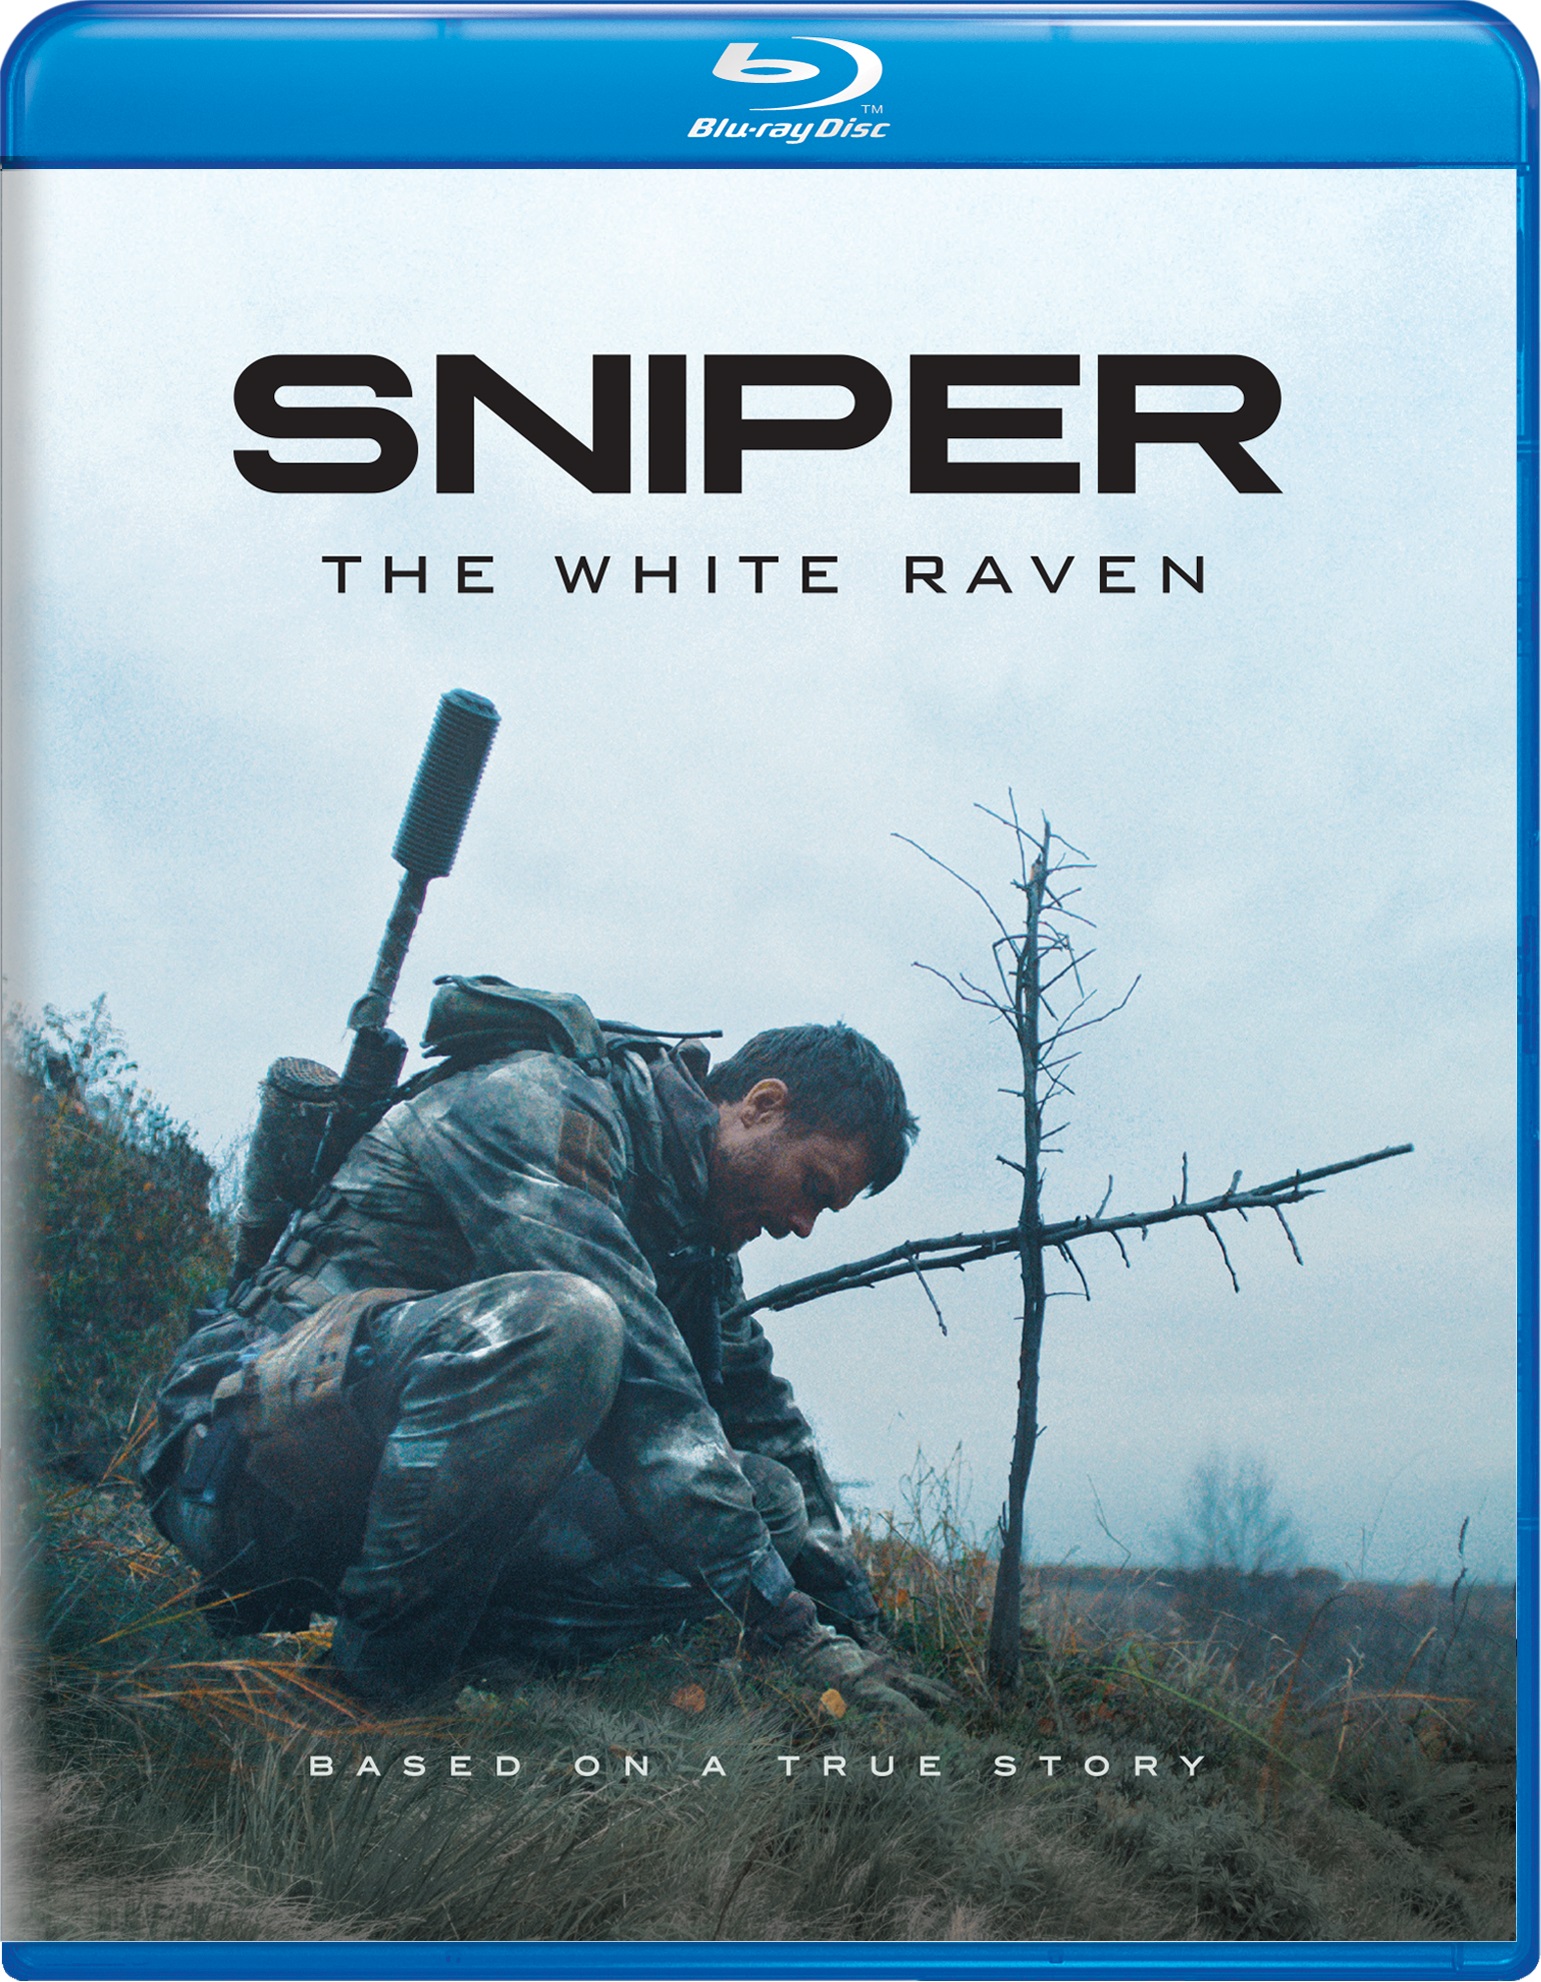 Sniper - The White Raven - Blu-ray [ 2022 ]  - Foreign Movies On Blu-ray - Movies On GRUV